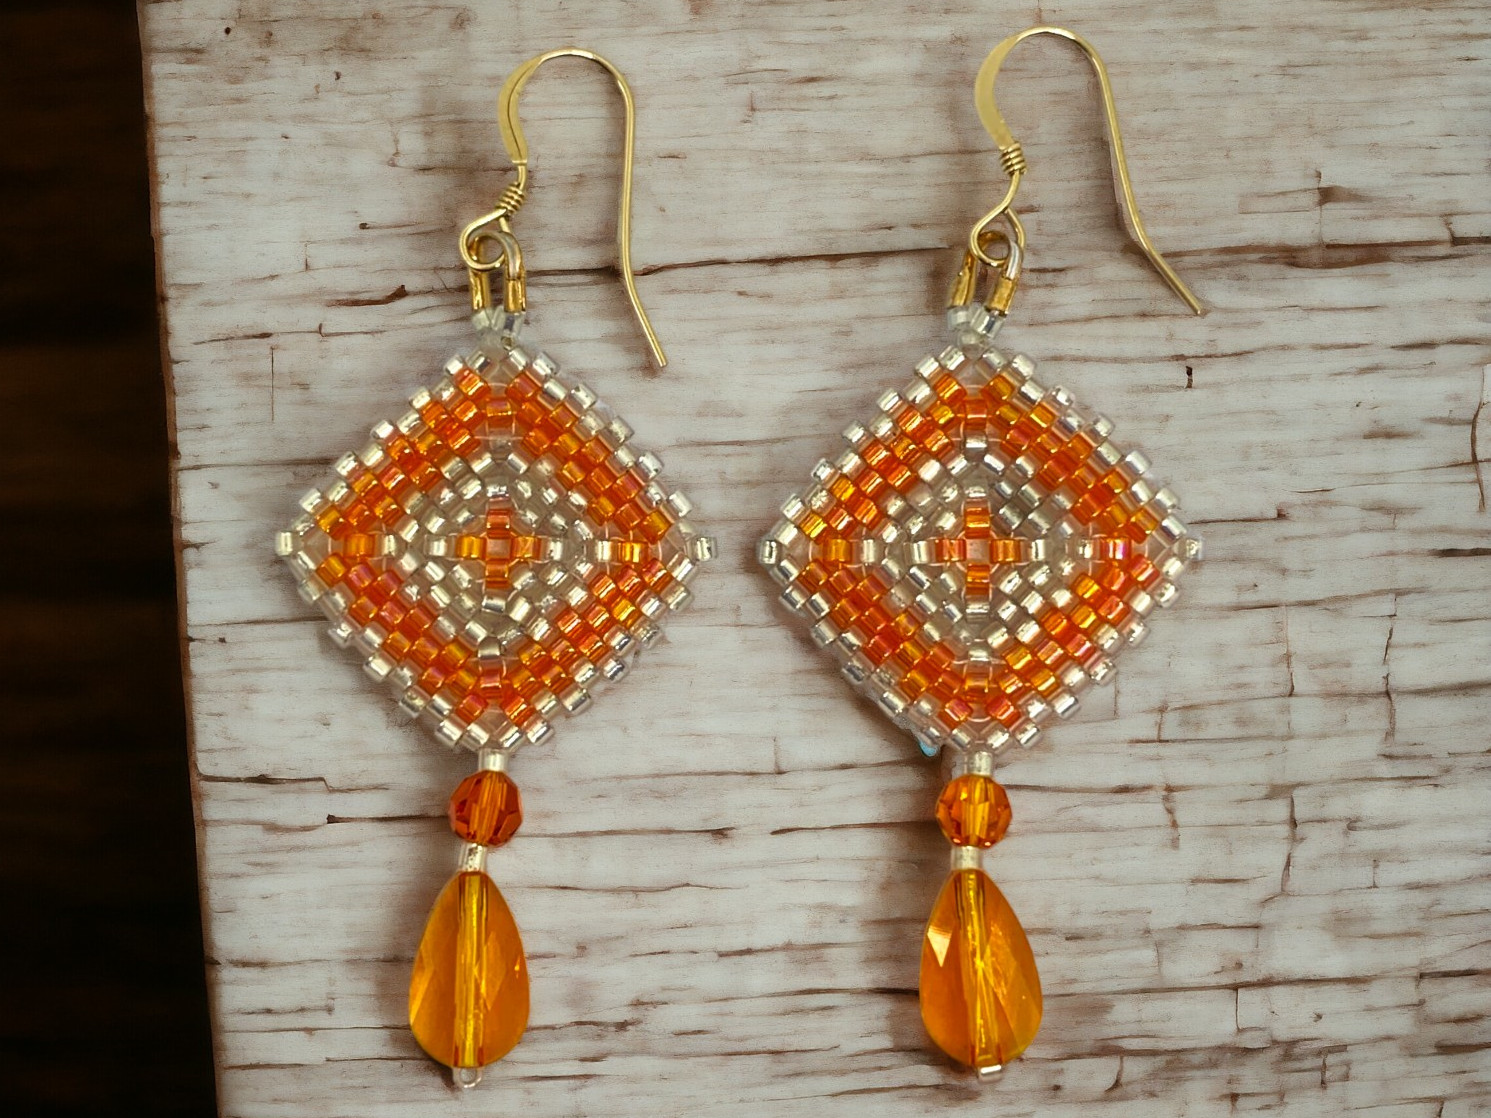 Classic Square-Shaped Beadwork Earrings, Peyote Stitch Earrings with Crystal Accents